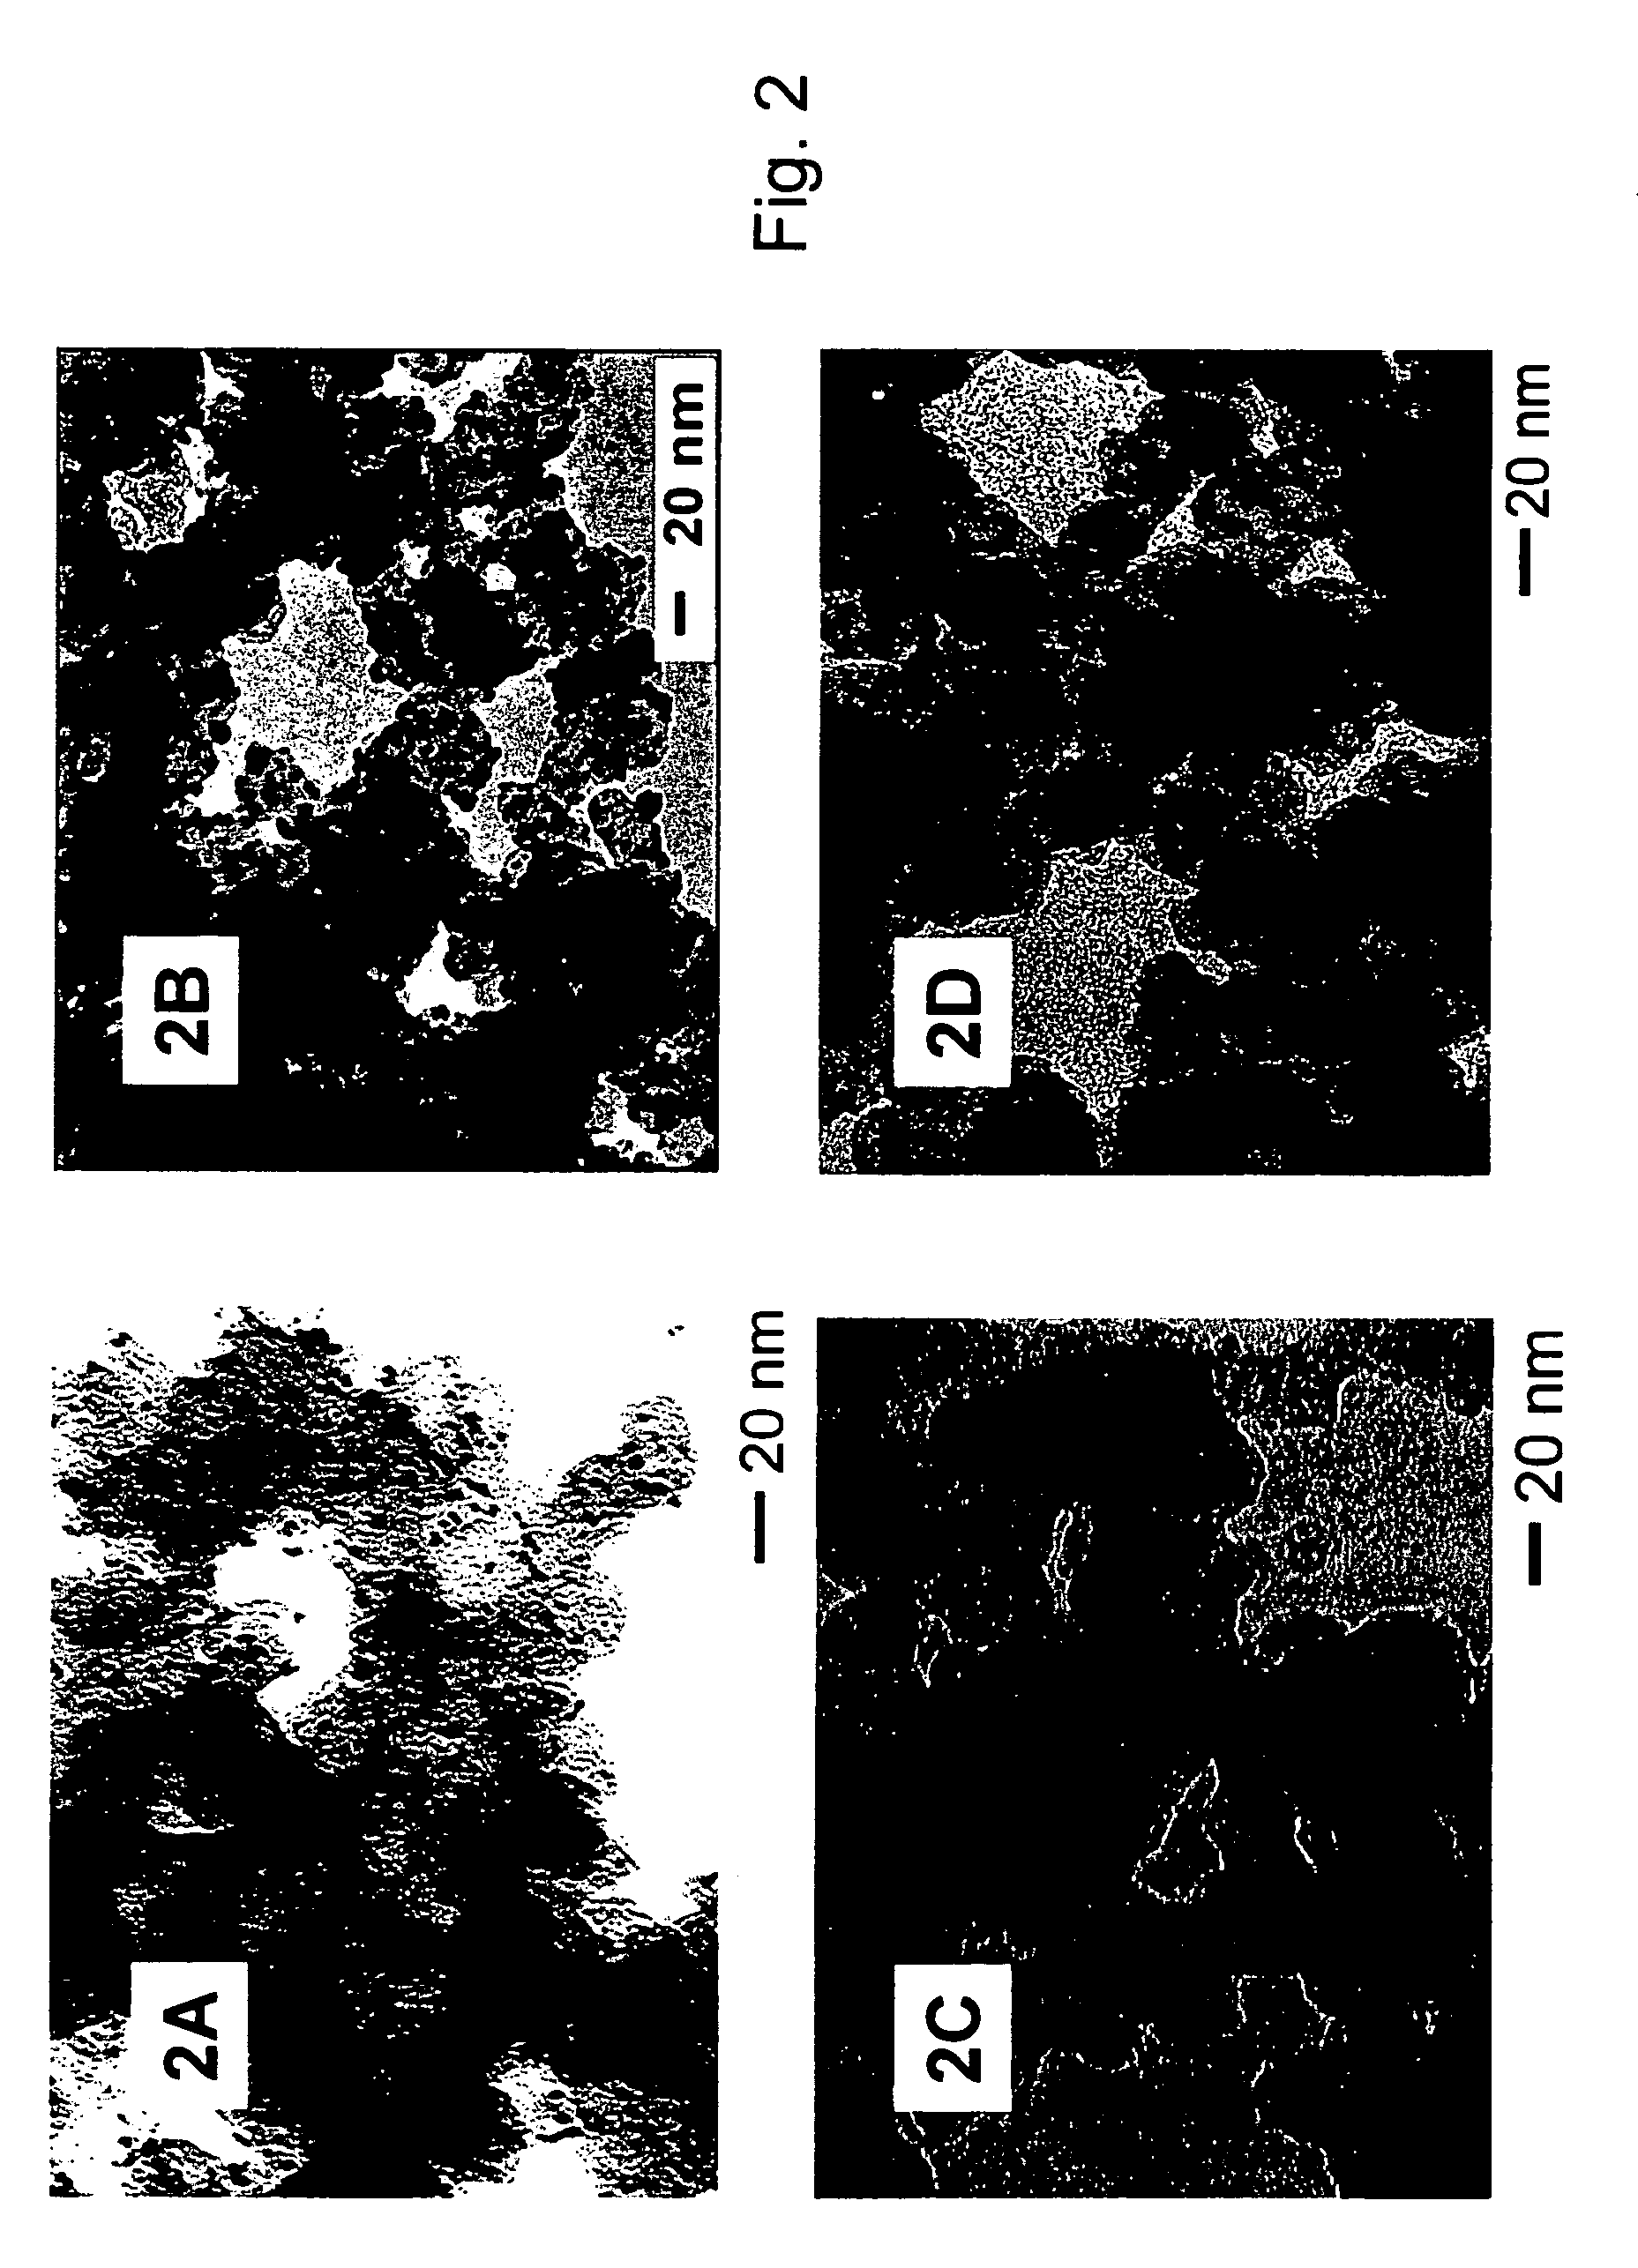 Metal and alloy nanoparticles and synthesis methods thereof